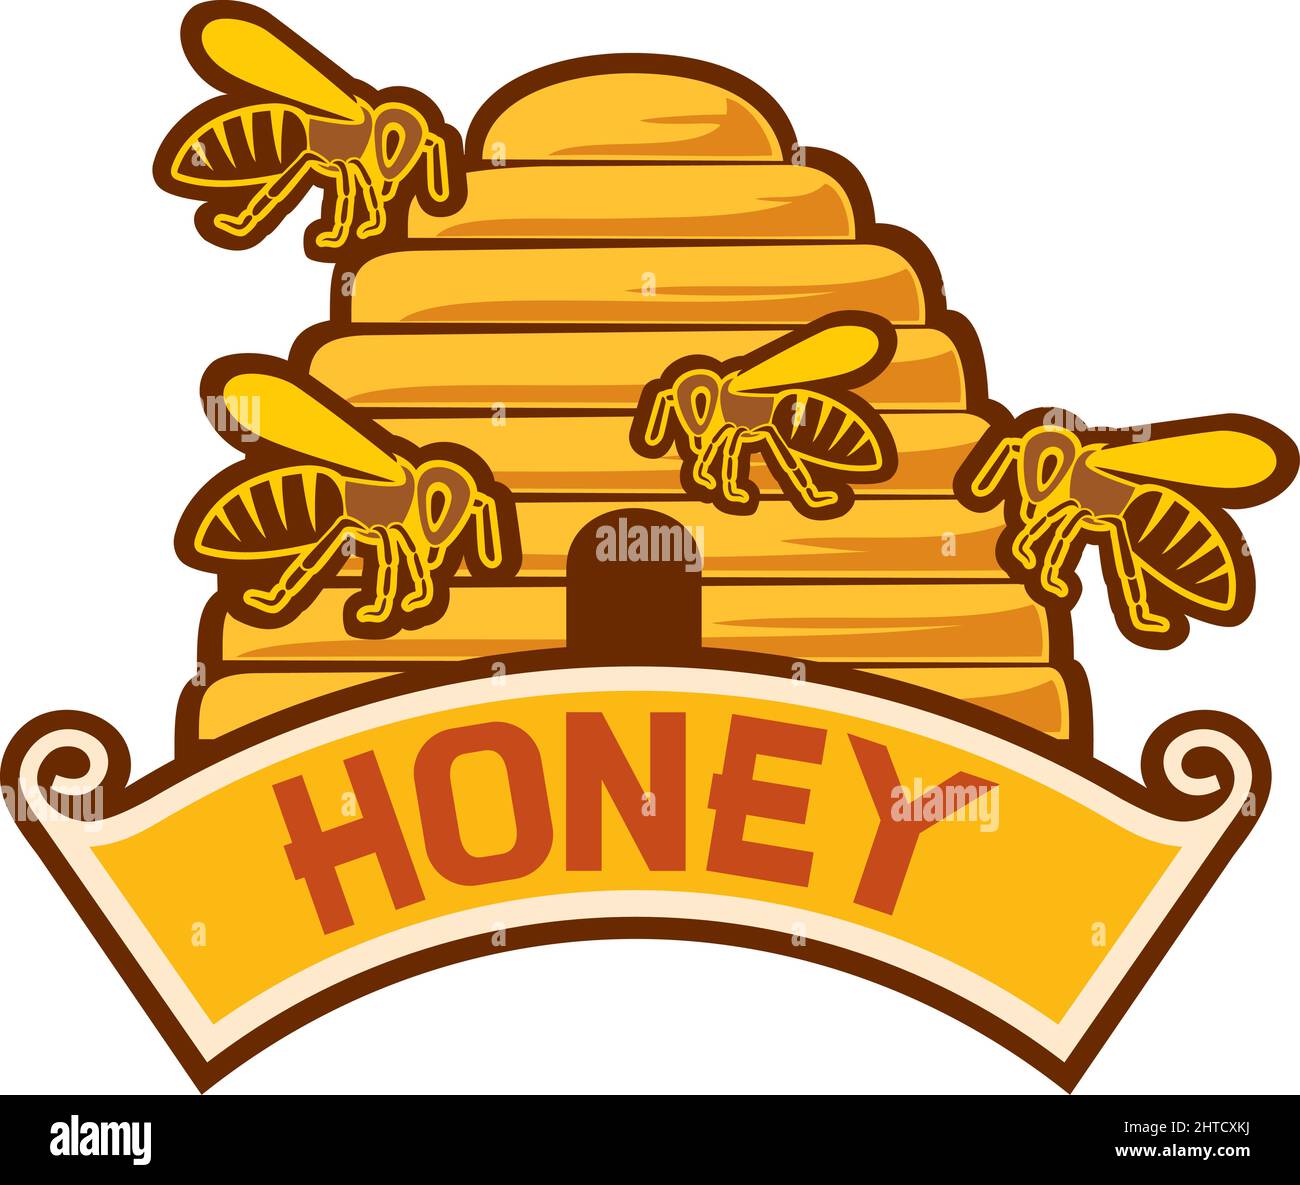 Honey label - bee and beehive vector illustration Stock Vector